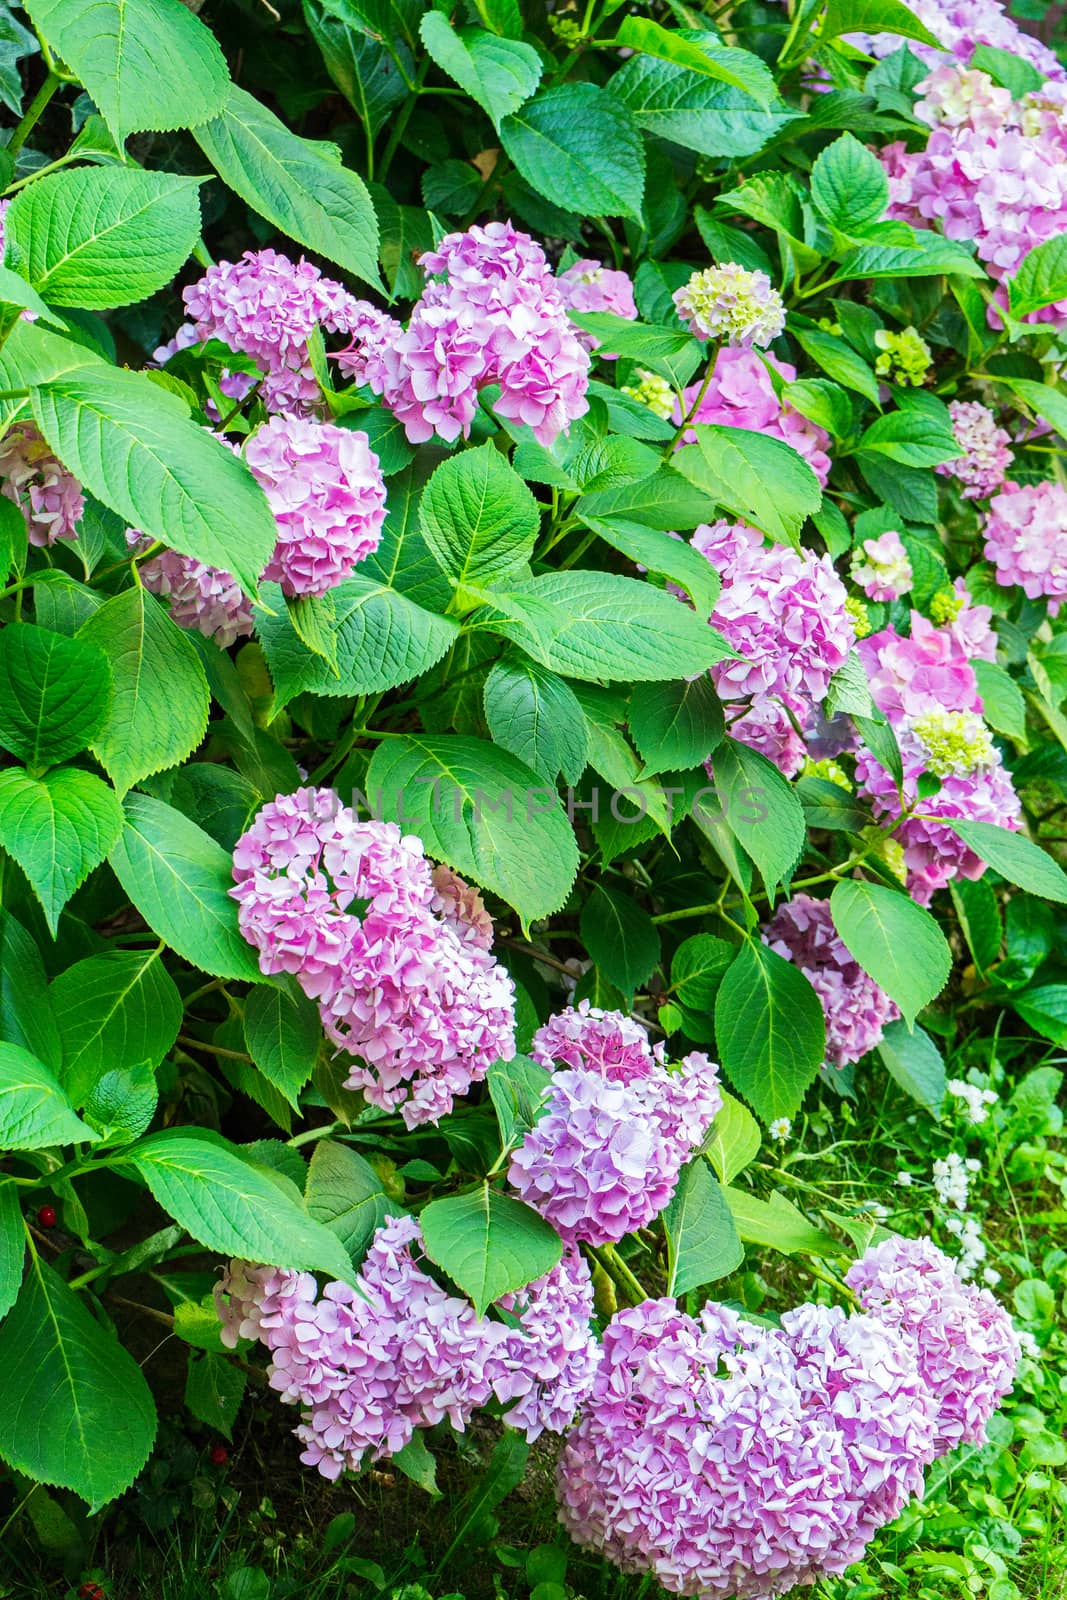 A bush of lilac. Narvi, put the house in a vase of water and the house will acquire a special atmosphere and aroma by Adamchuk